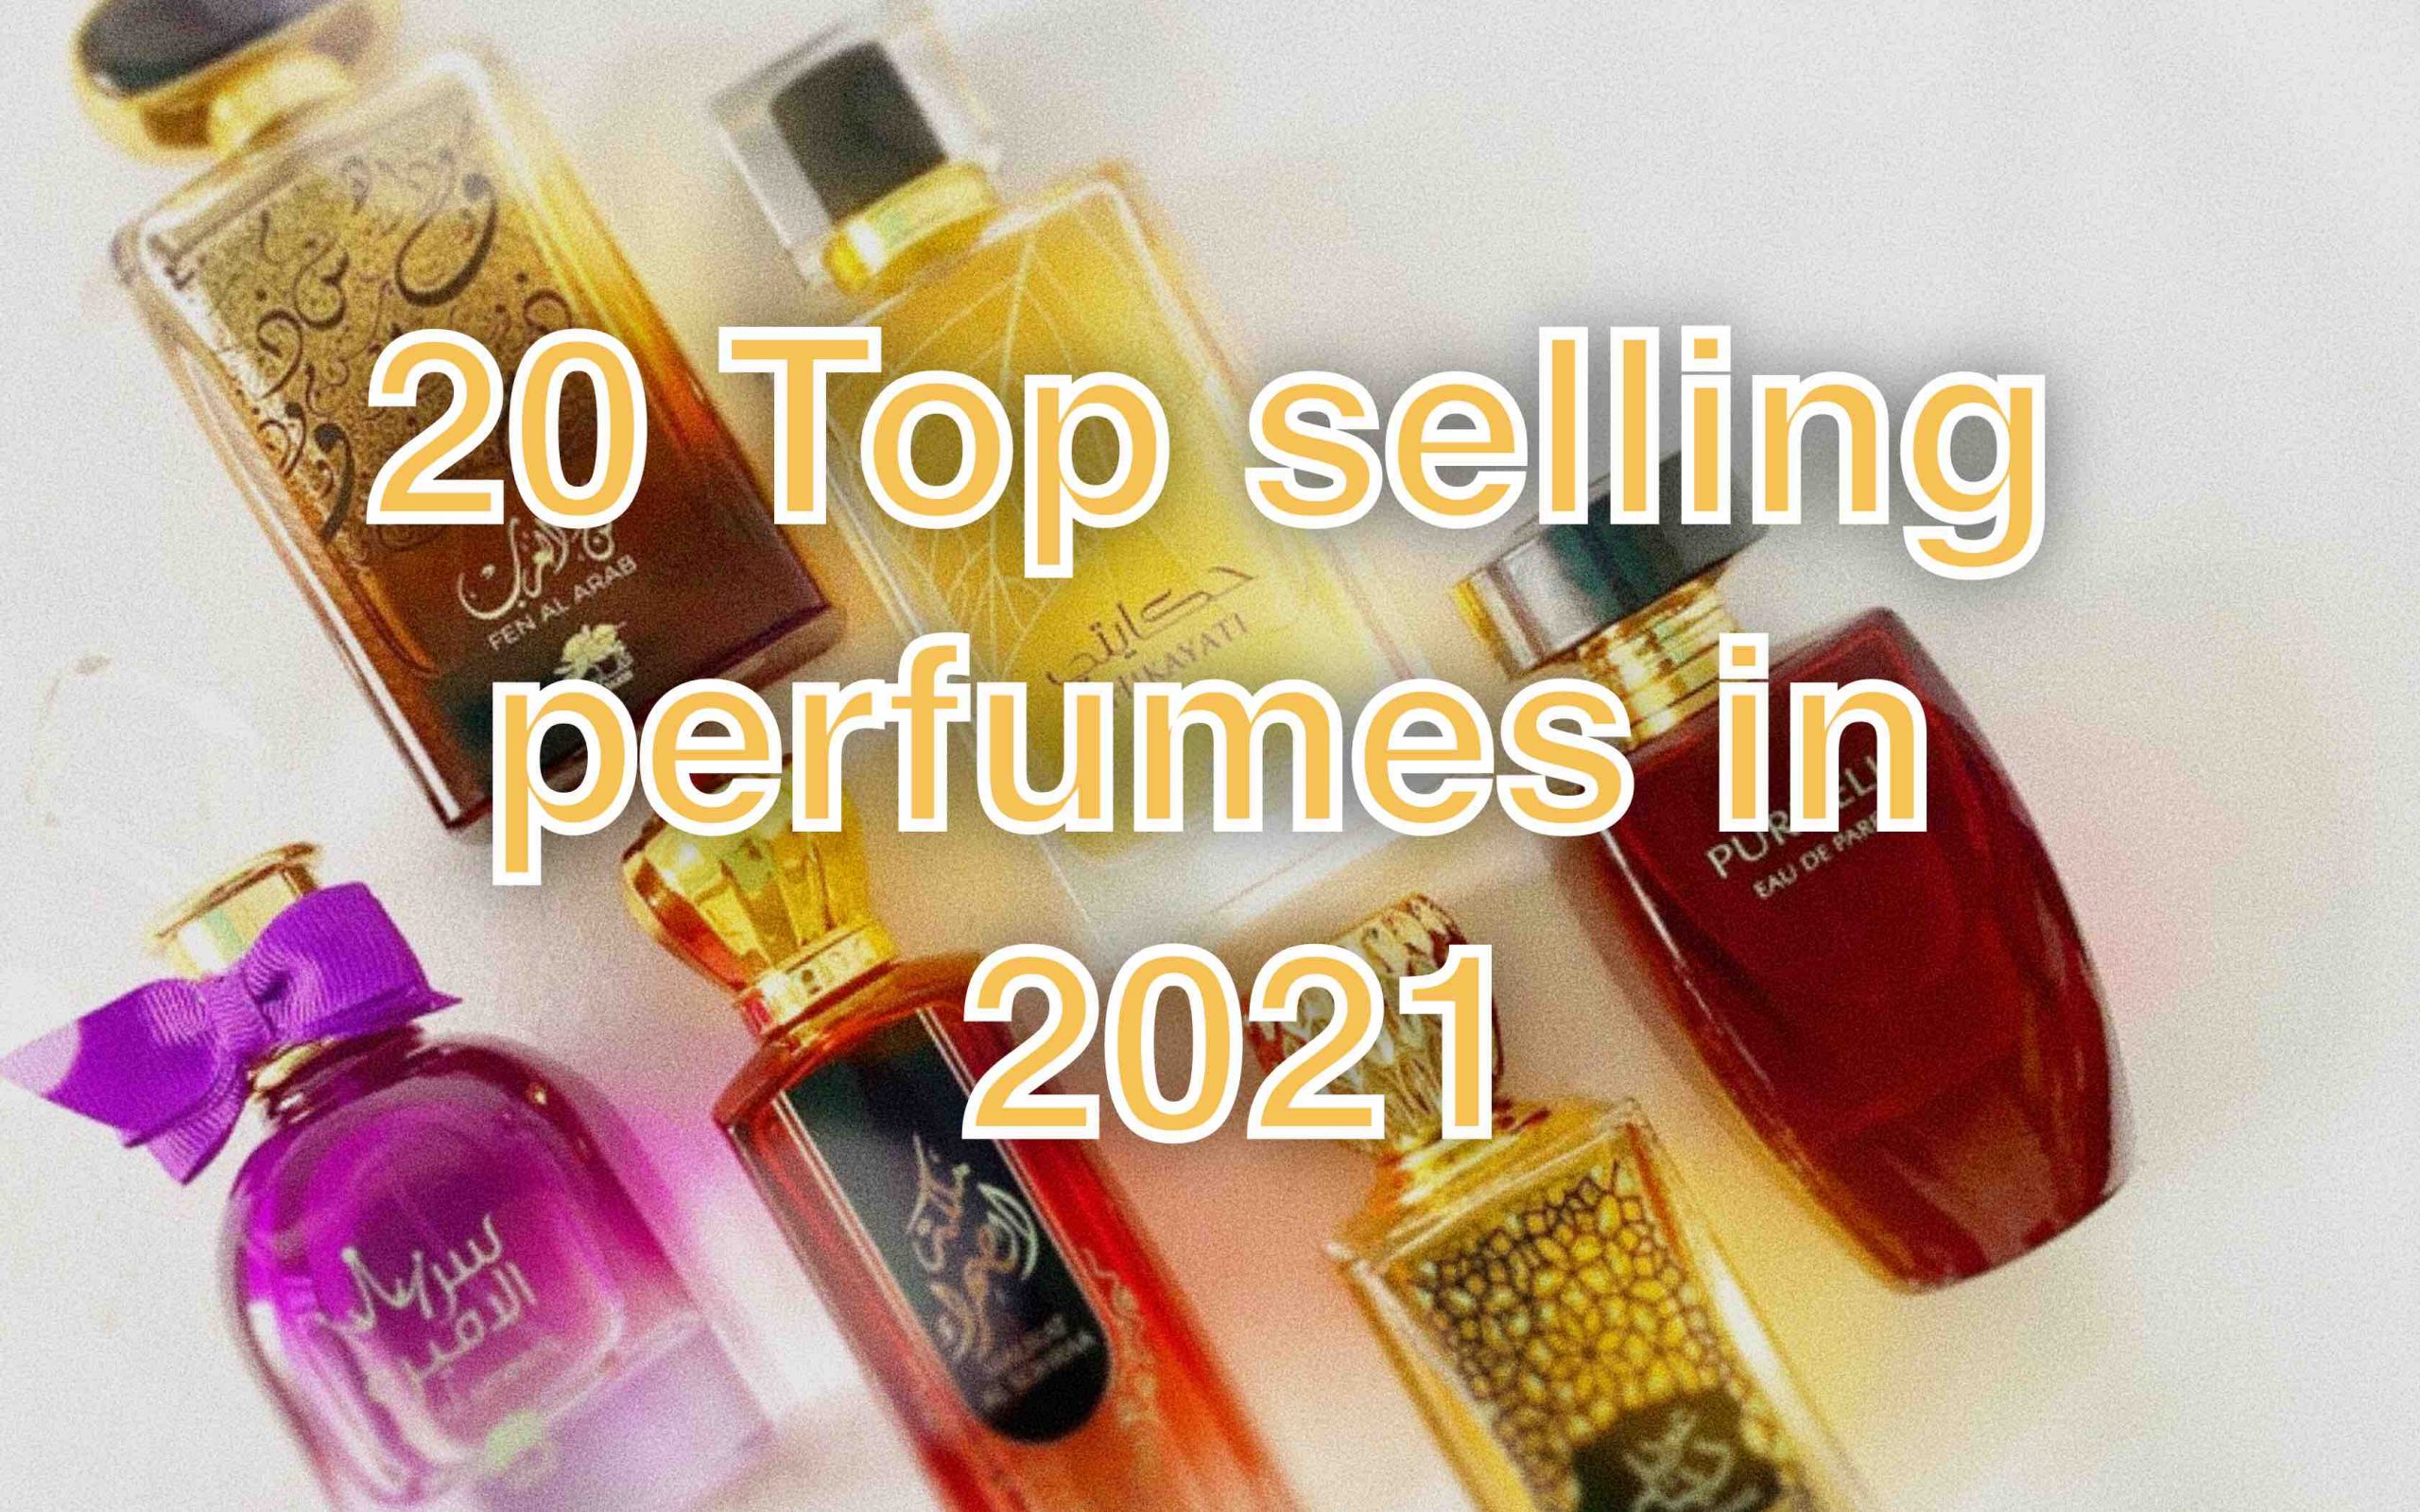 20 Top selling perfumes on DOT Made in 2021 - DOT Made